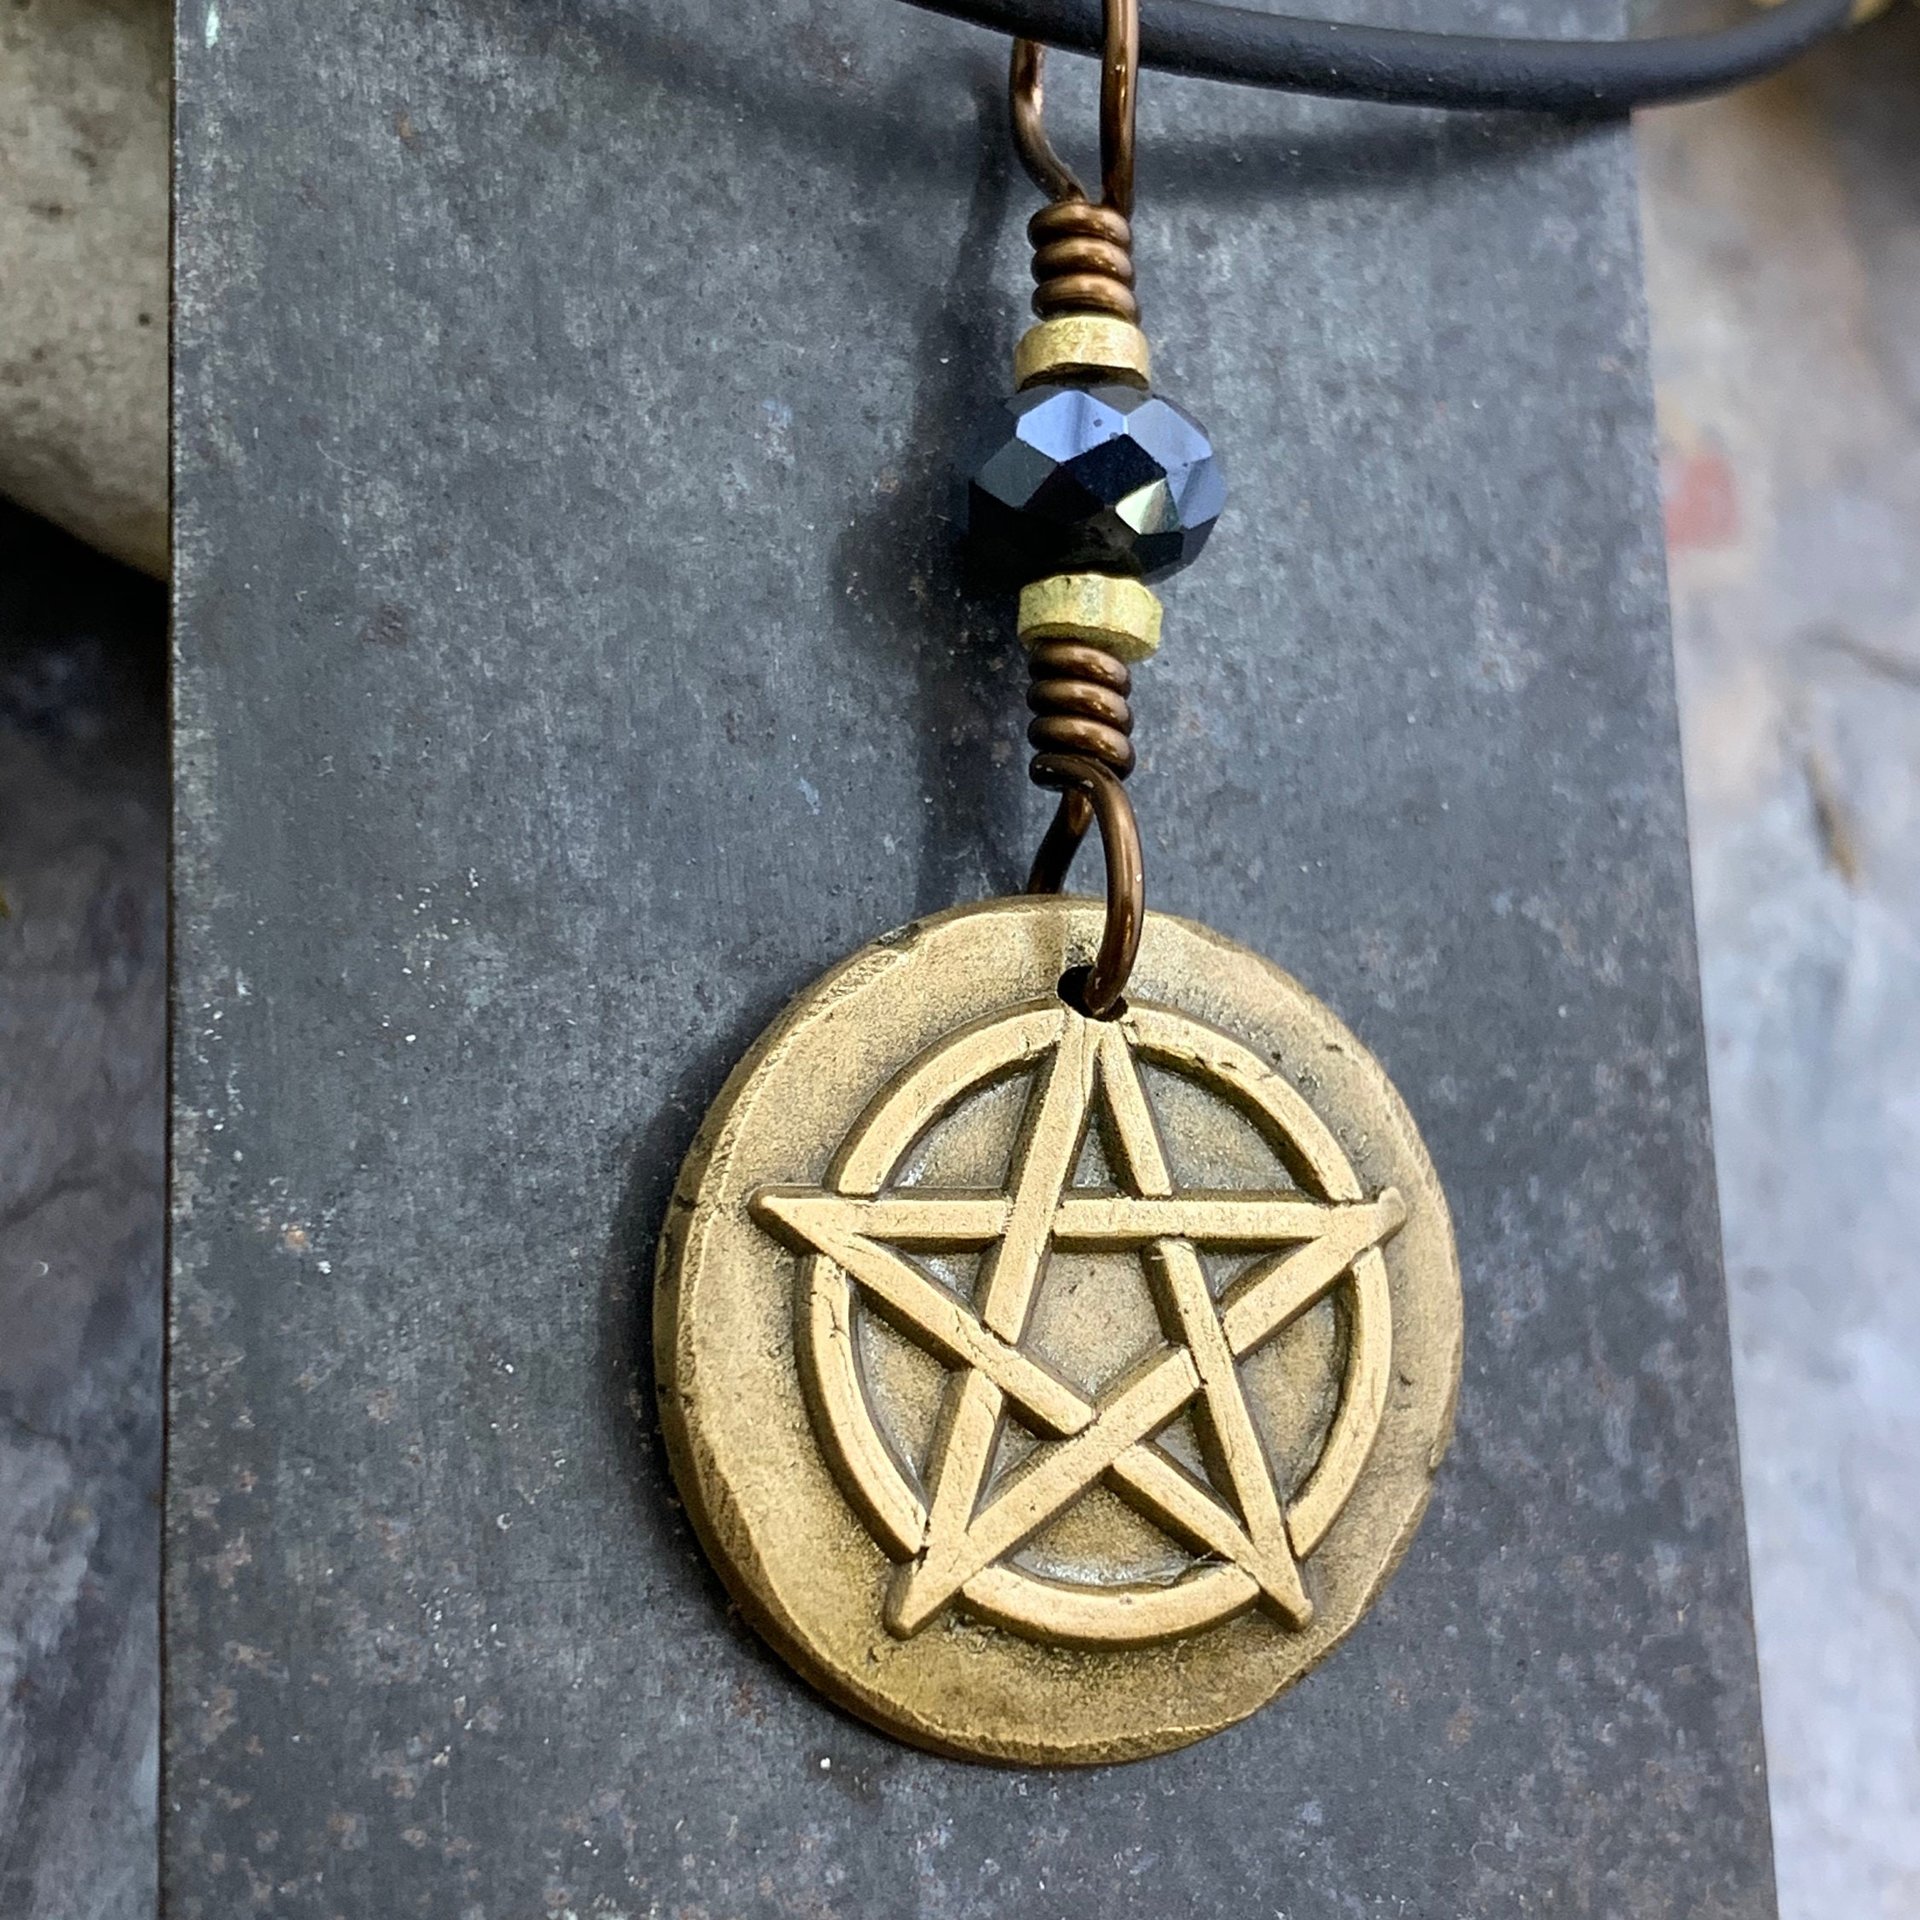 Pentagram Bronze Charm, Pentacle Pendant, Black Crystal Bead, Leather & Vegan Cords, Pagan Wicca, 5 Elements Star, Handmade, Witchy Things